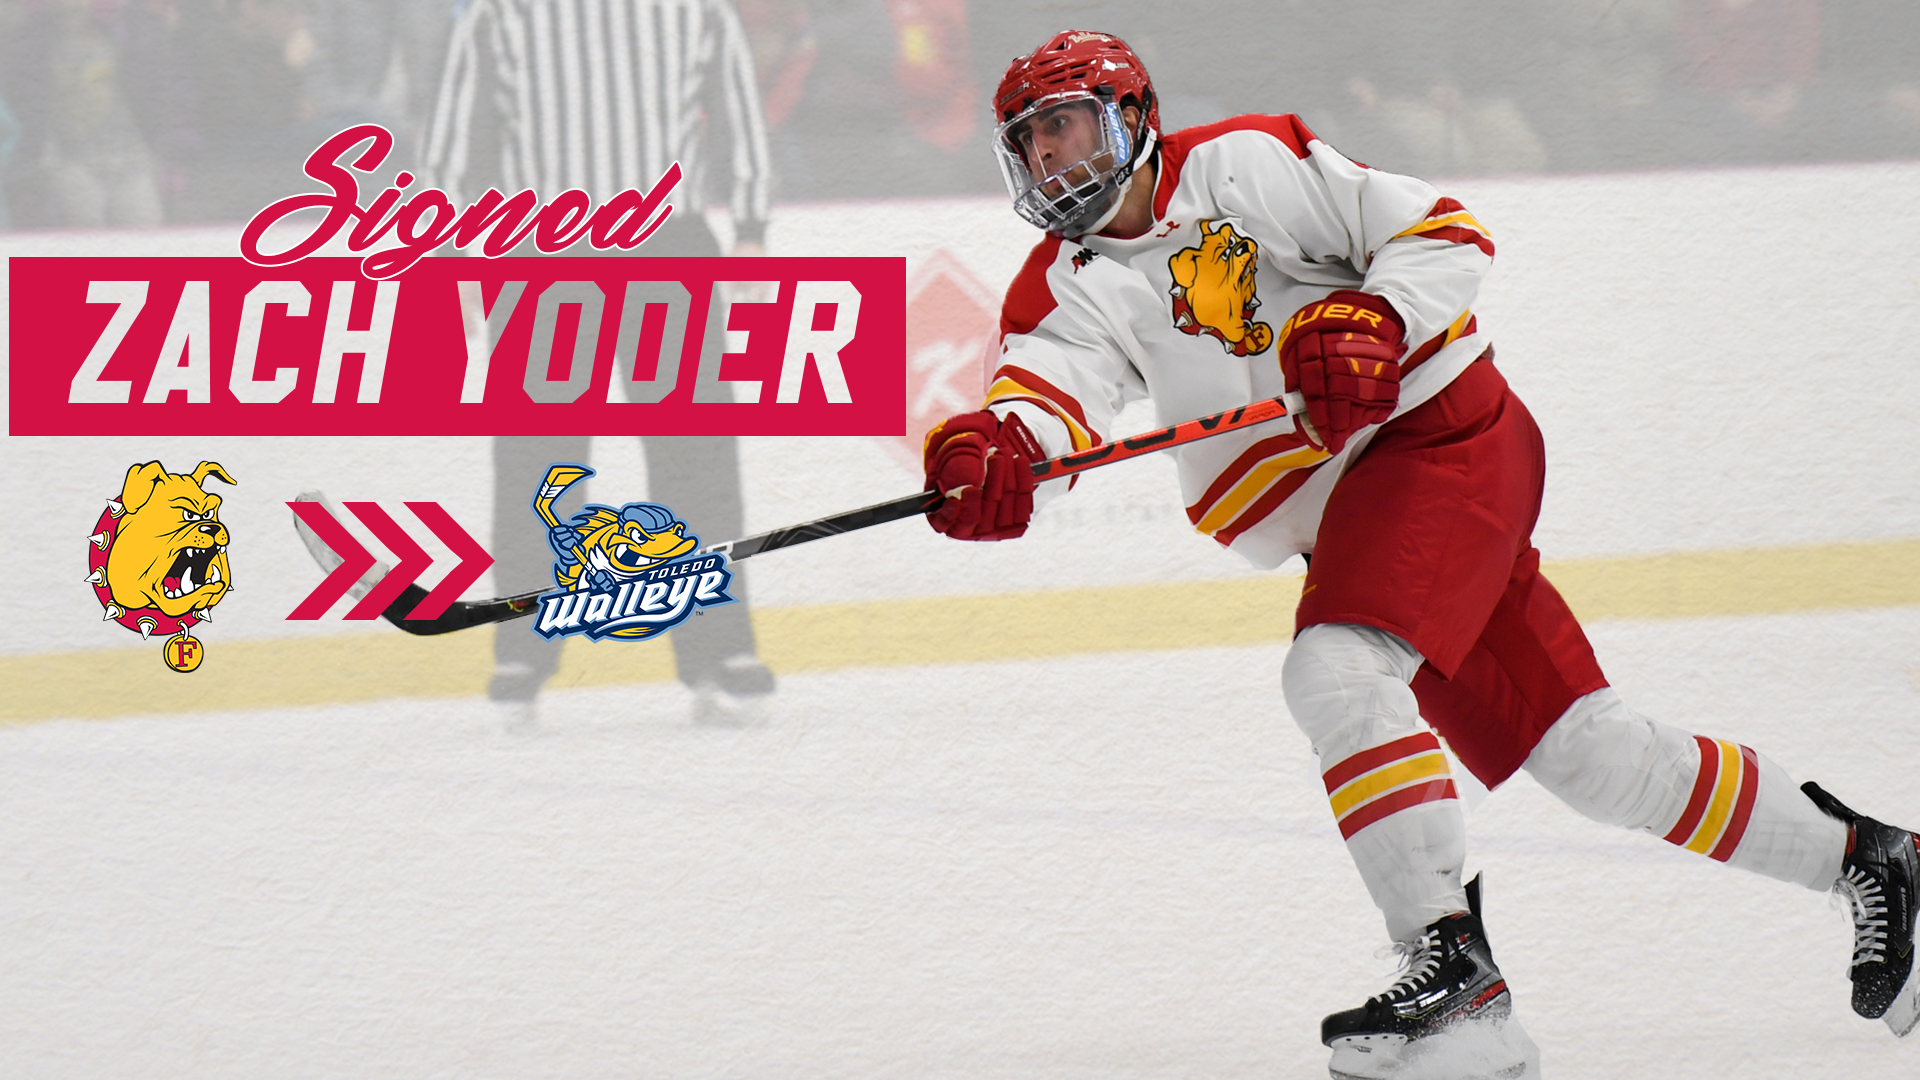 Third Ferris State Senior Turns Pro As Yoder Heads To Ferris State Alum Hotbed Toledo